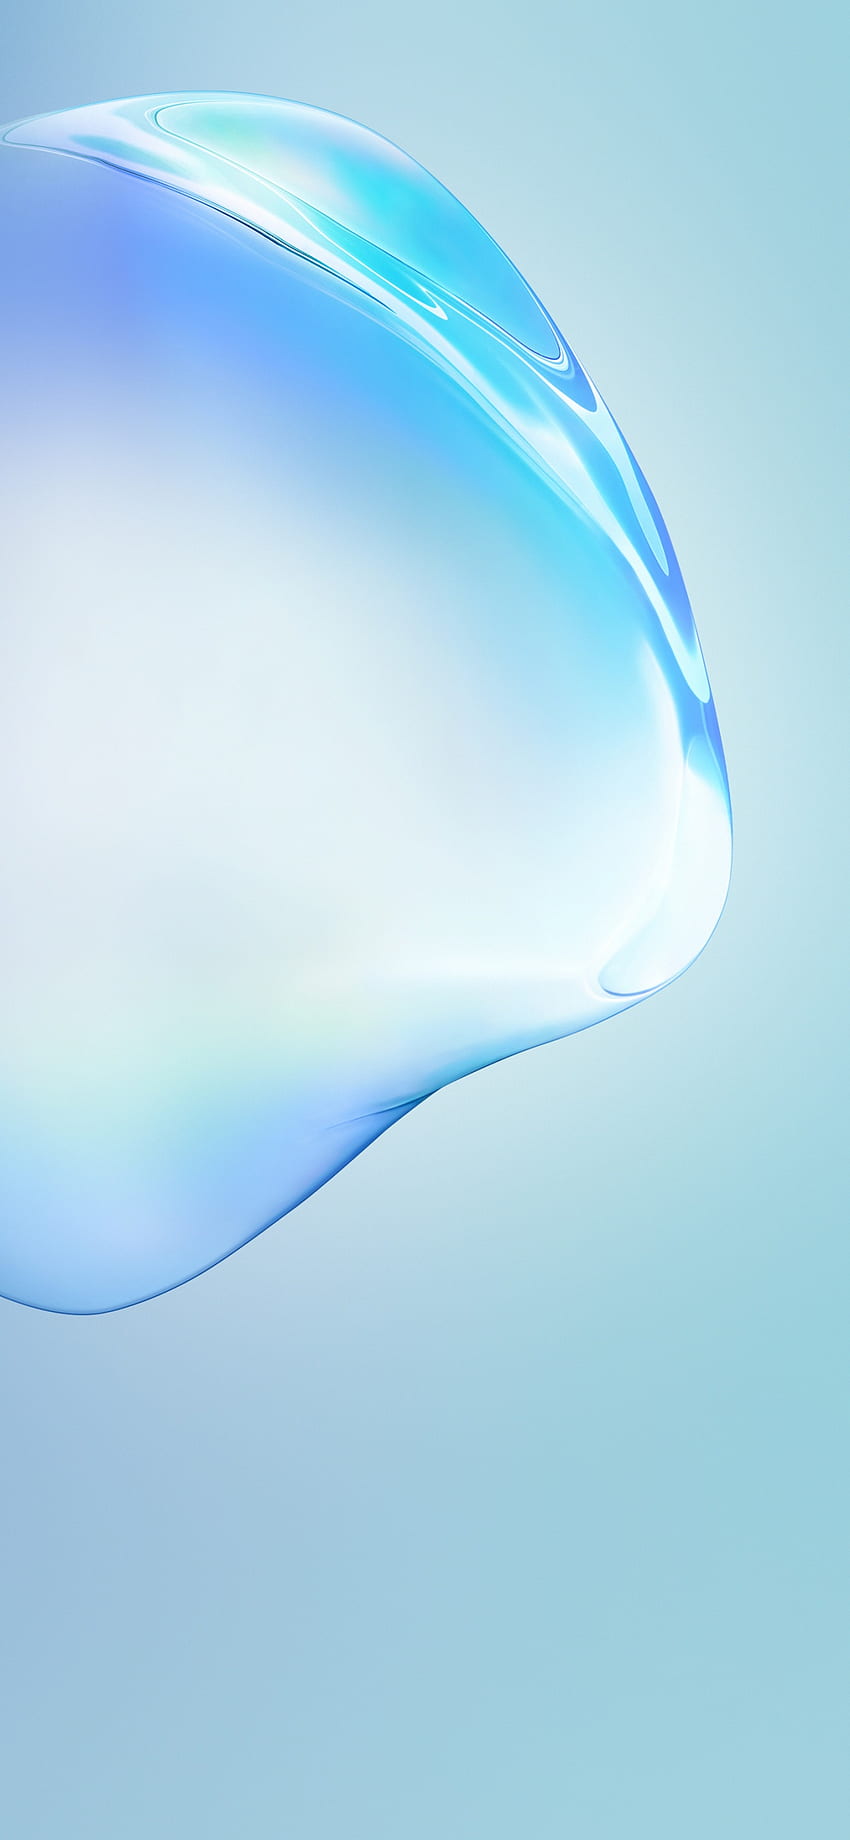 Samsung Galaxy Note10 , Bubble, Blue, Stock, Android 10, Abstract, Galaxy Note HD phone wallpaper